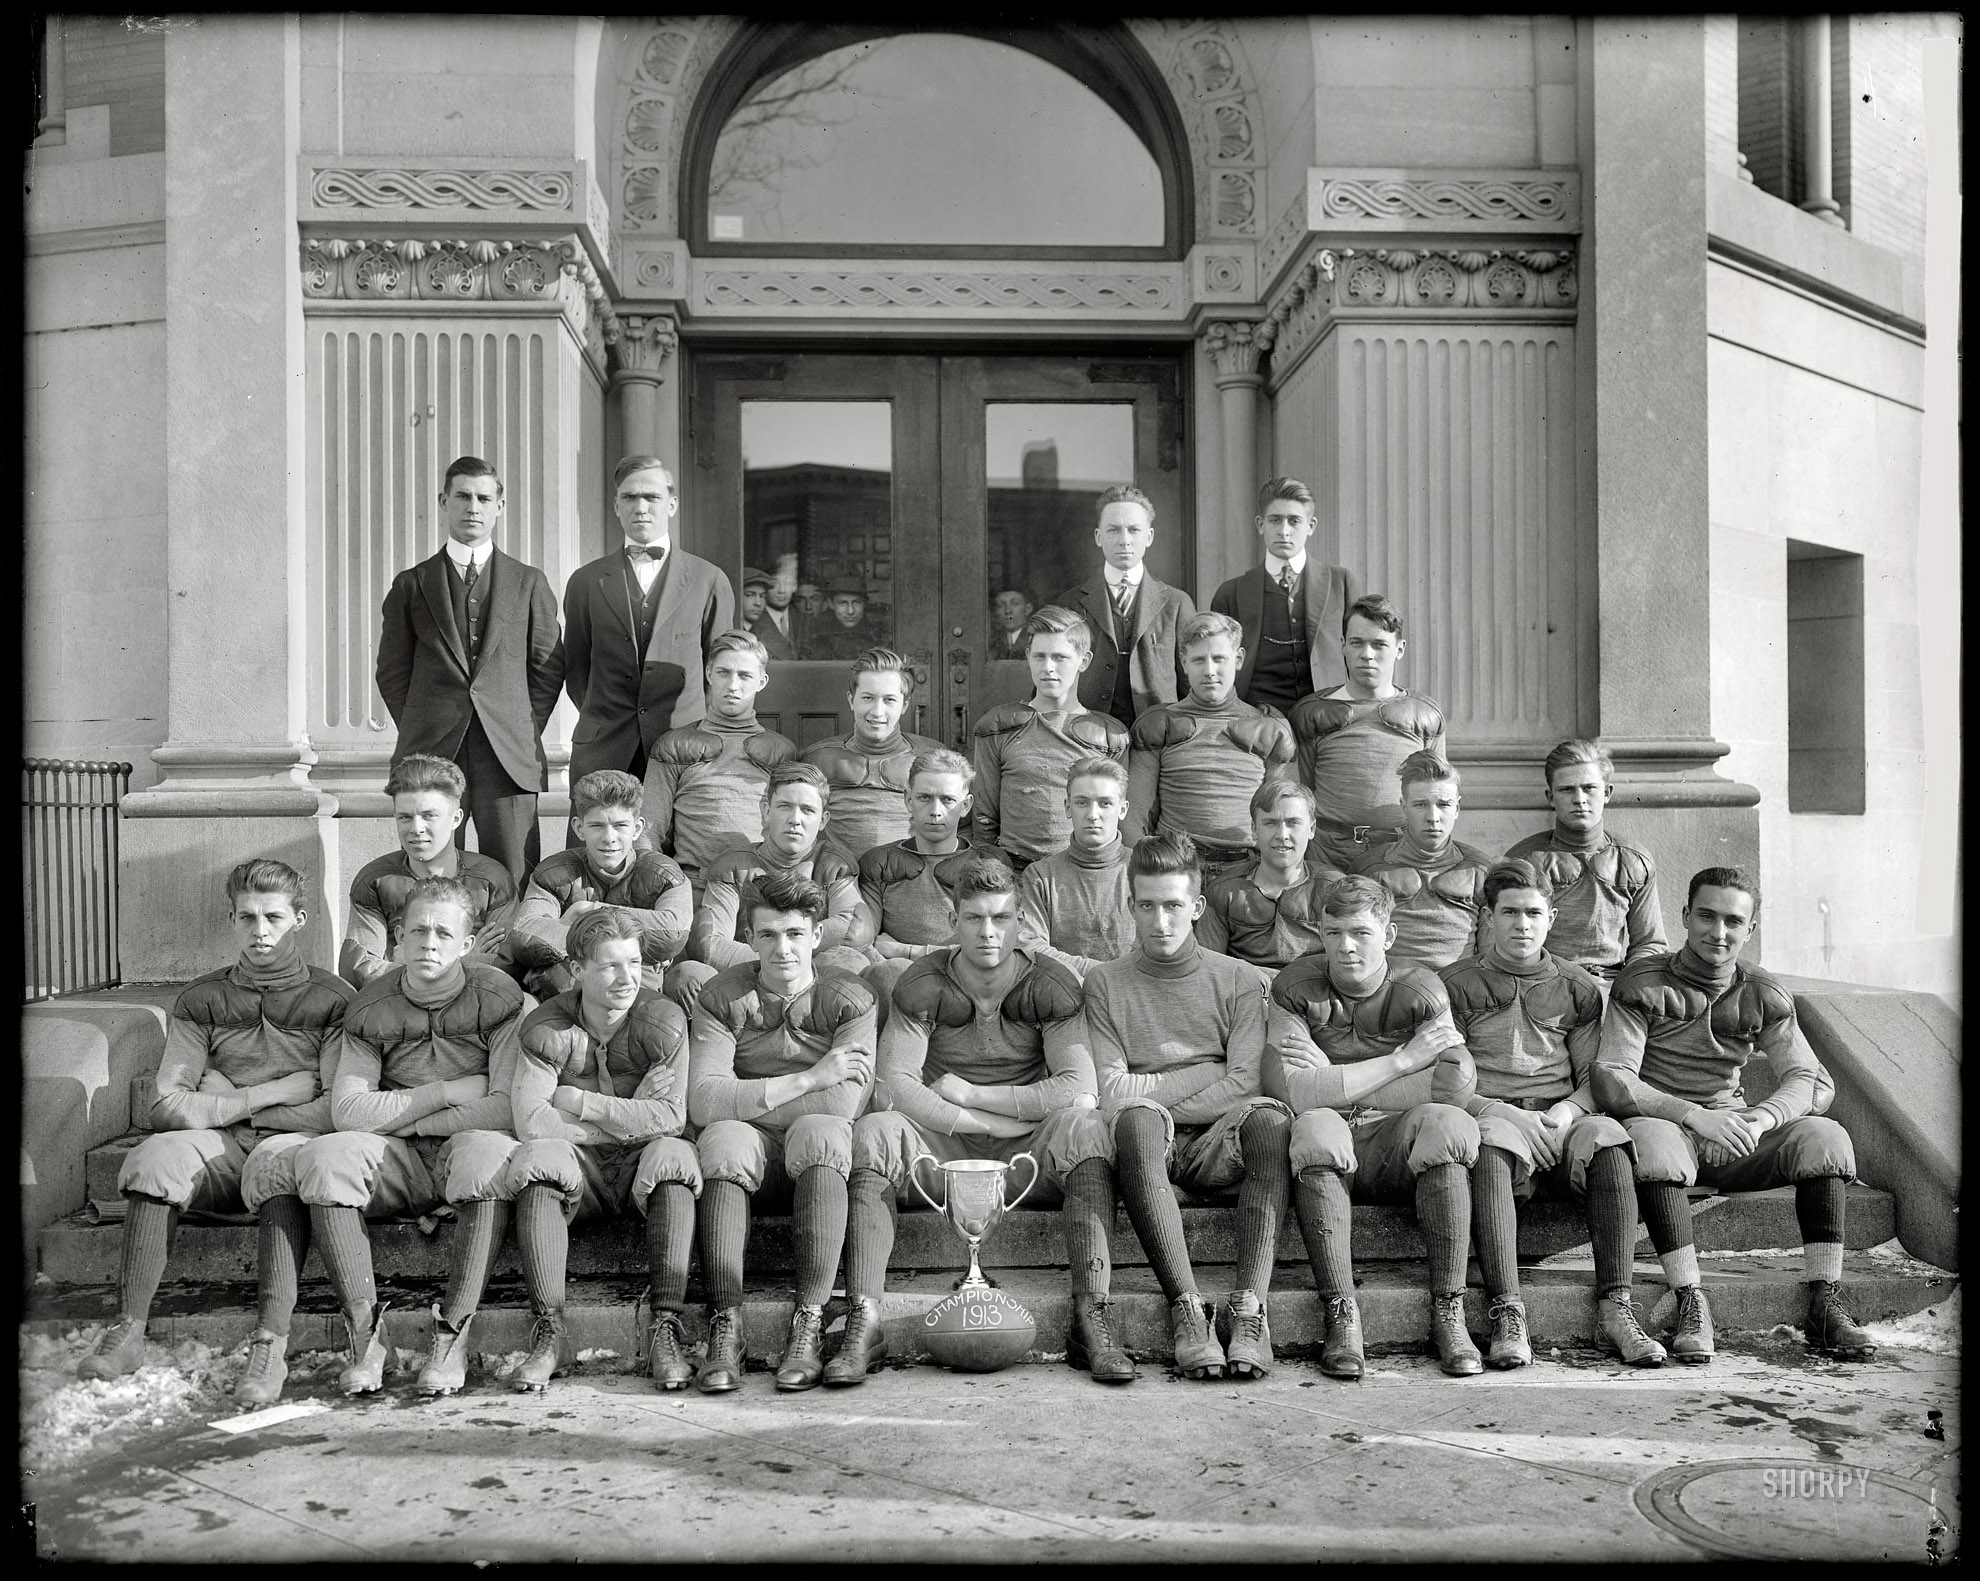 Washington, D.C., 1913. "Technical High School. Football team." Some of the nicest chaps you'd ever want to meet. Harris & Ewing Collection. View full size.